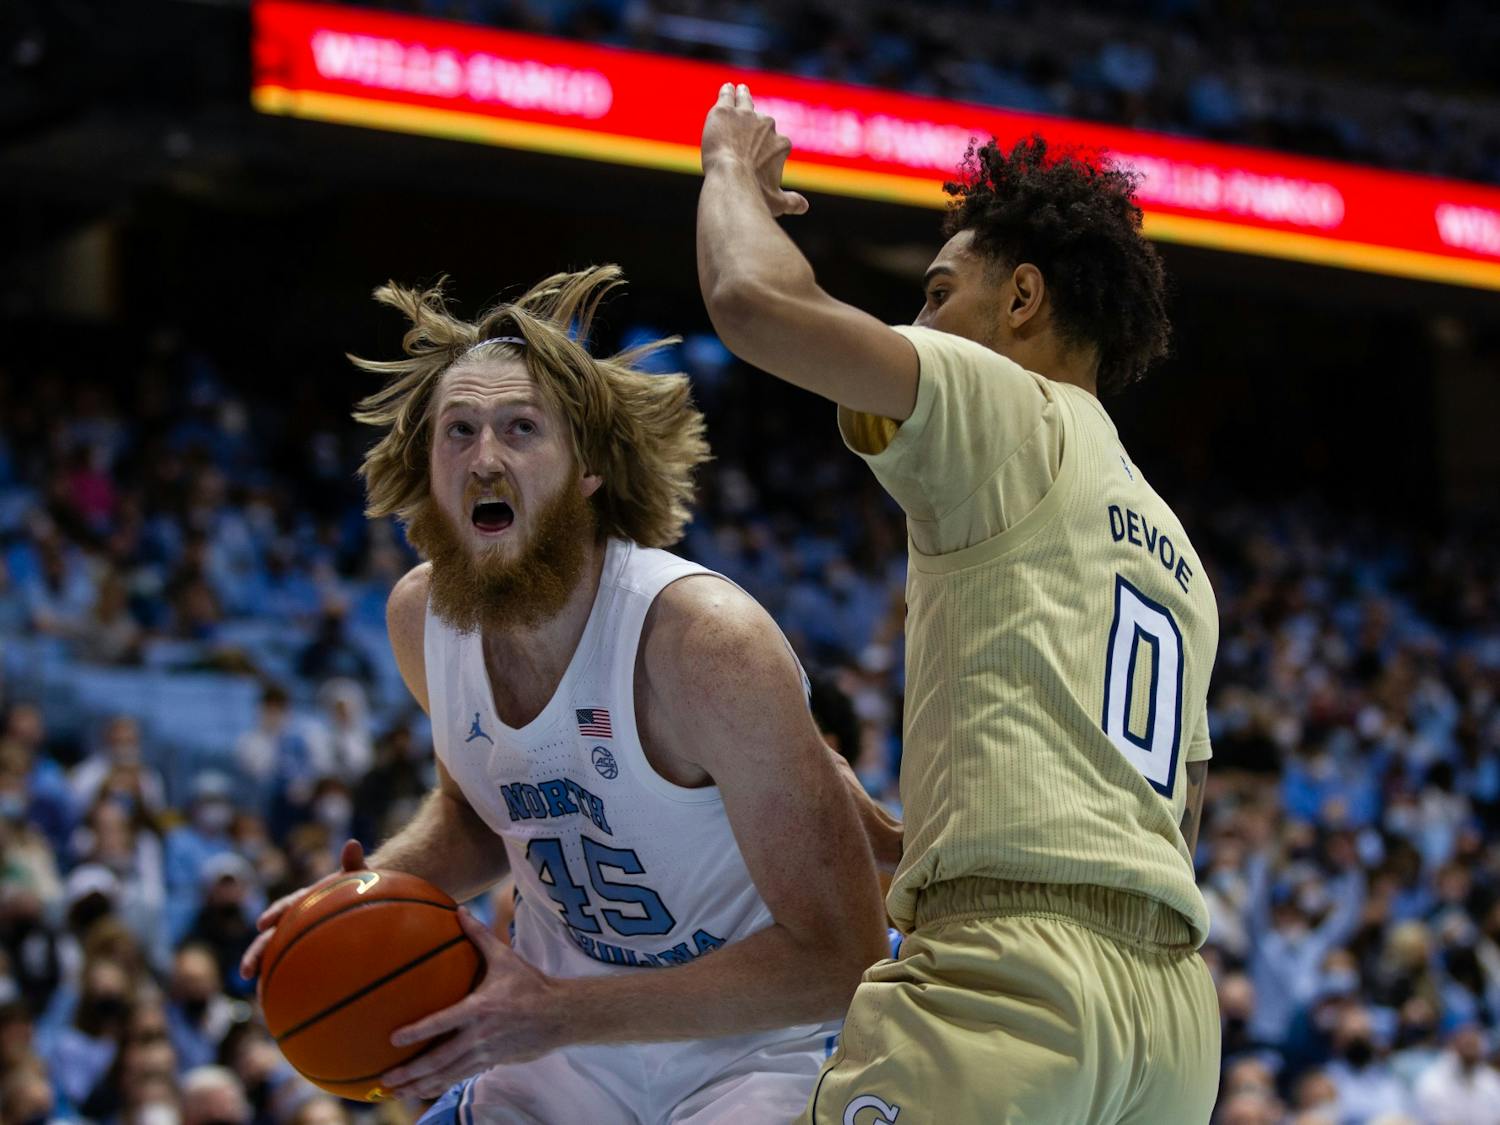 Graduate Brady Manek (45) defends the ball in the game against Georgia Tech in the Dean E. Smith Center on Saturday, Jan 15, 2022.